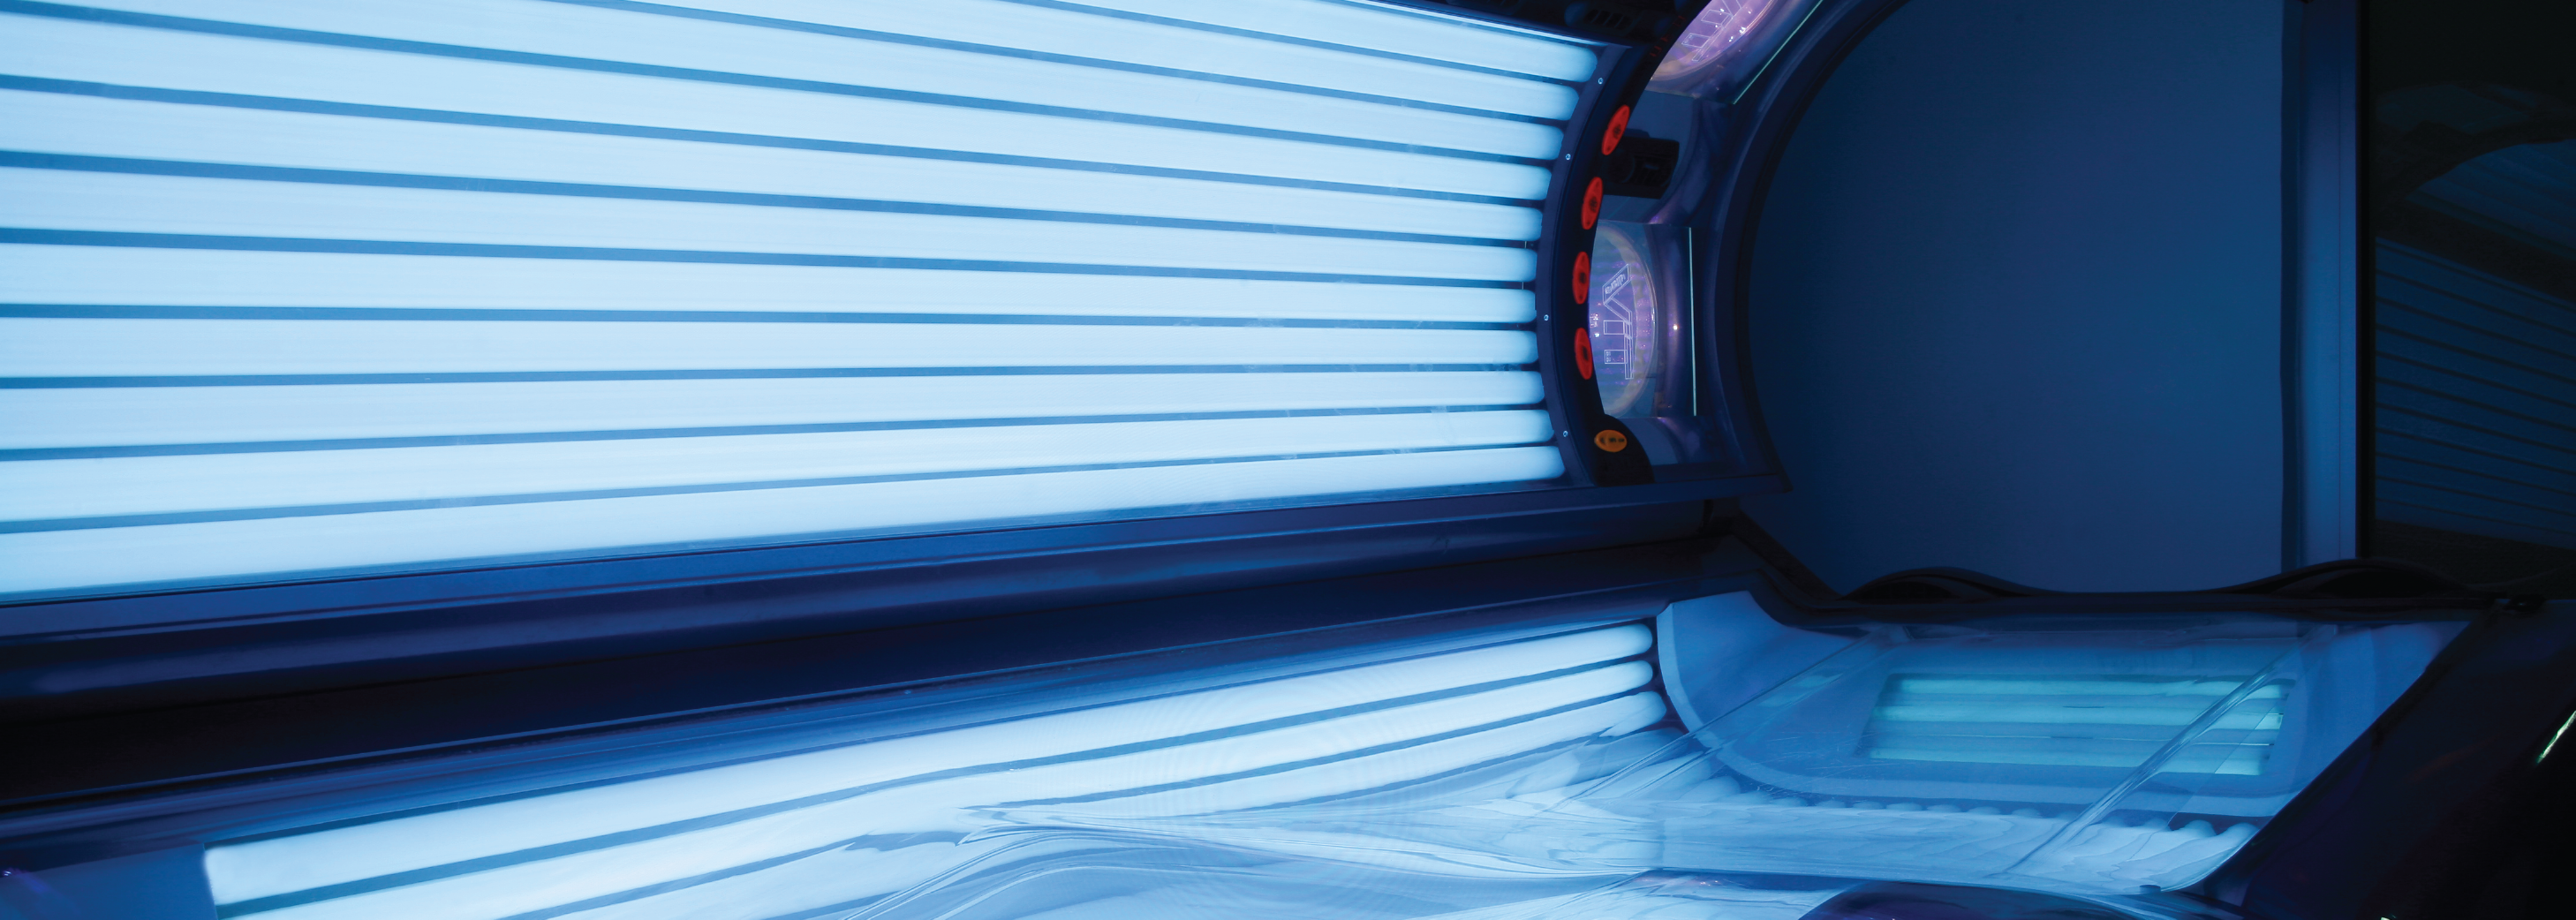 Empty tanning bed